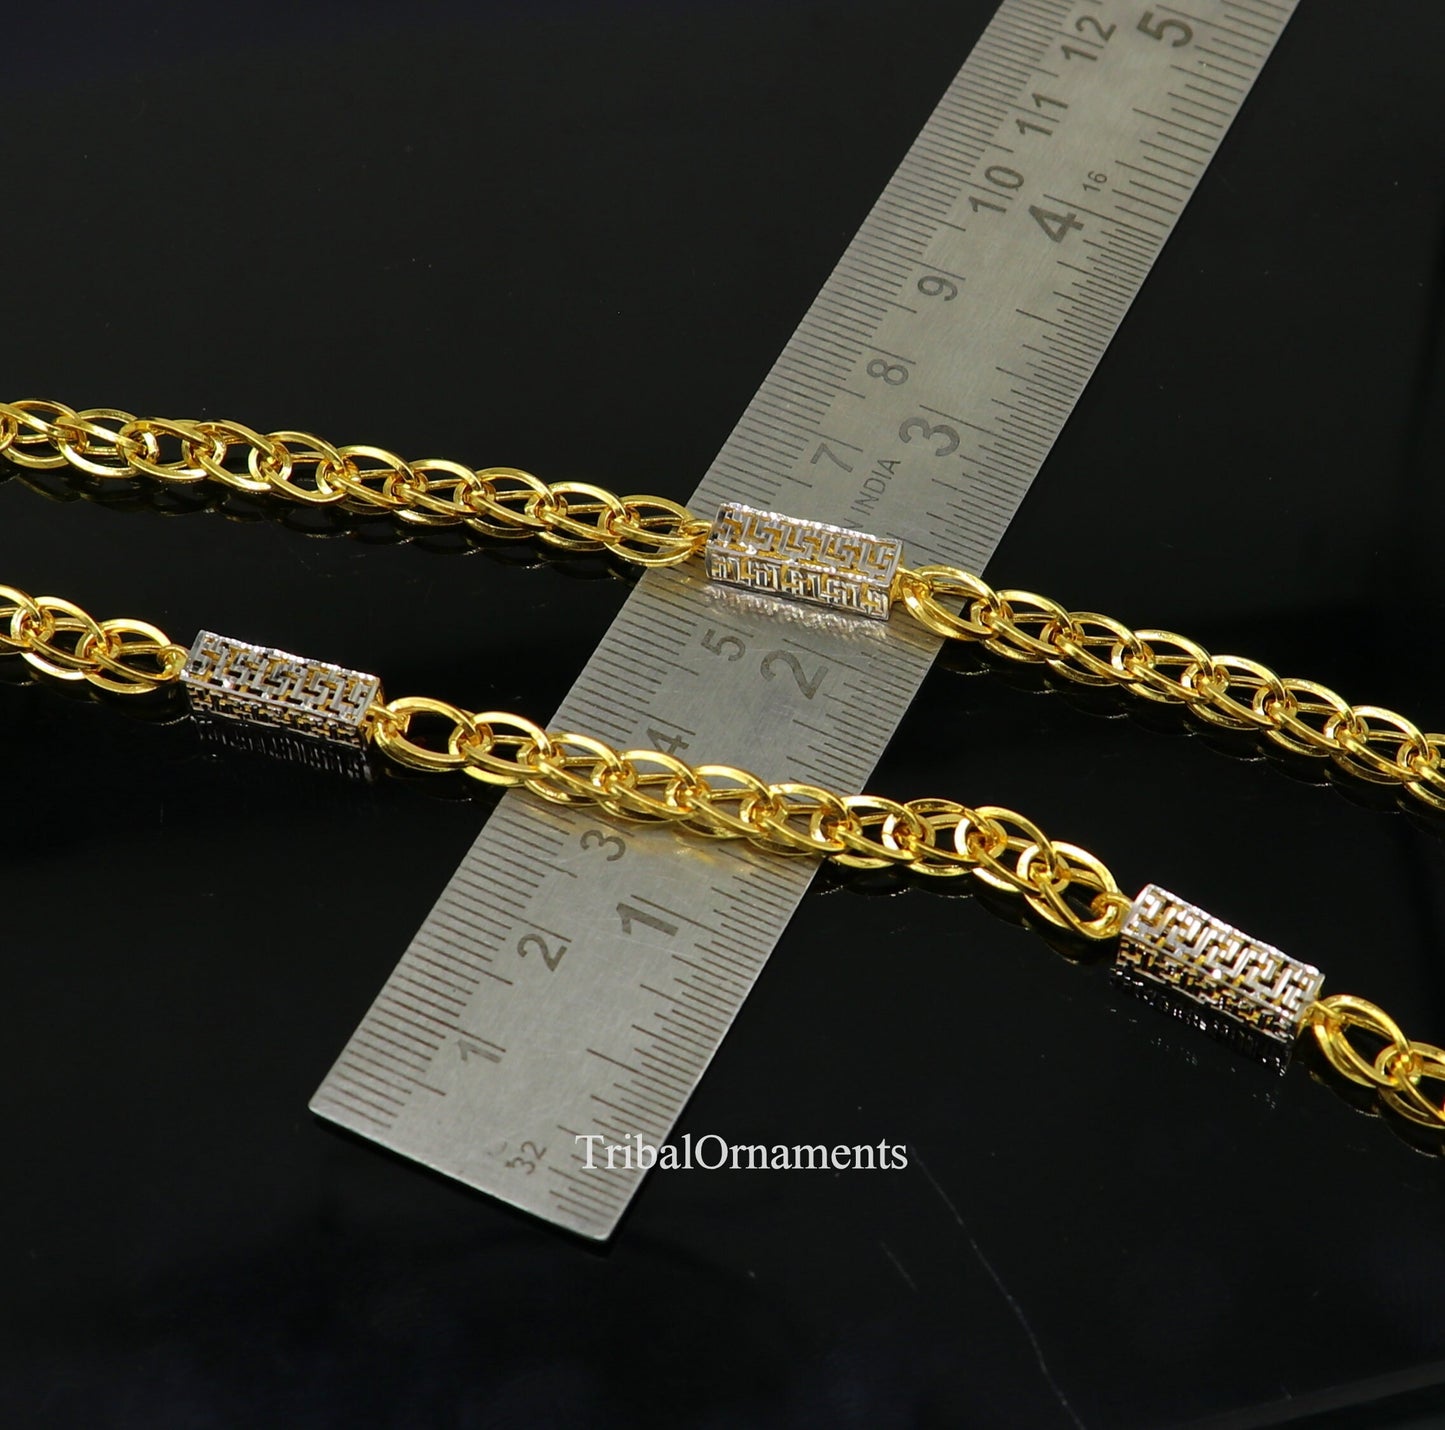 22kt yellow gold handmade exclusive unique design link chain, fancy stylish best gifting chain necklace, customized elegant chain ch232 - TRIBAL ORNAMENTS